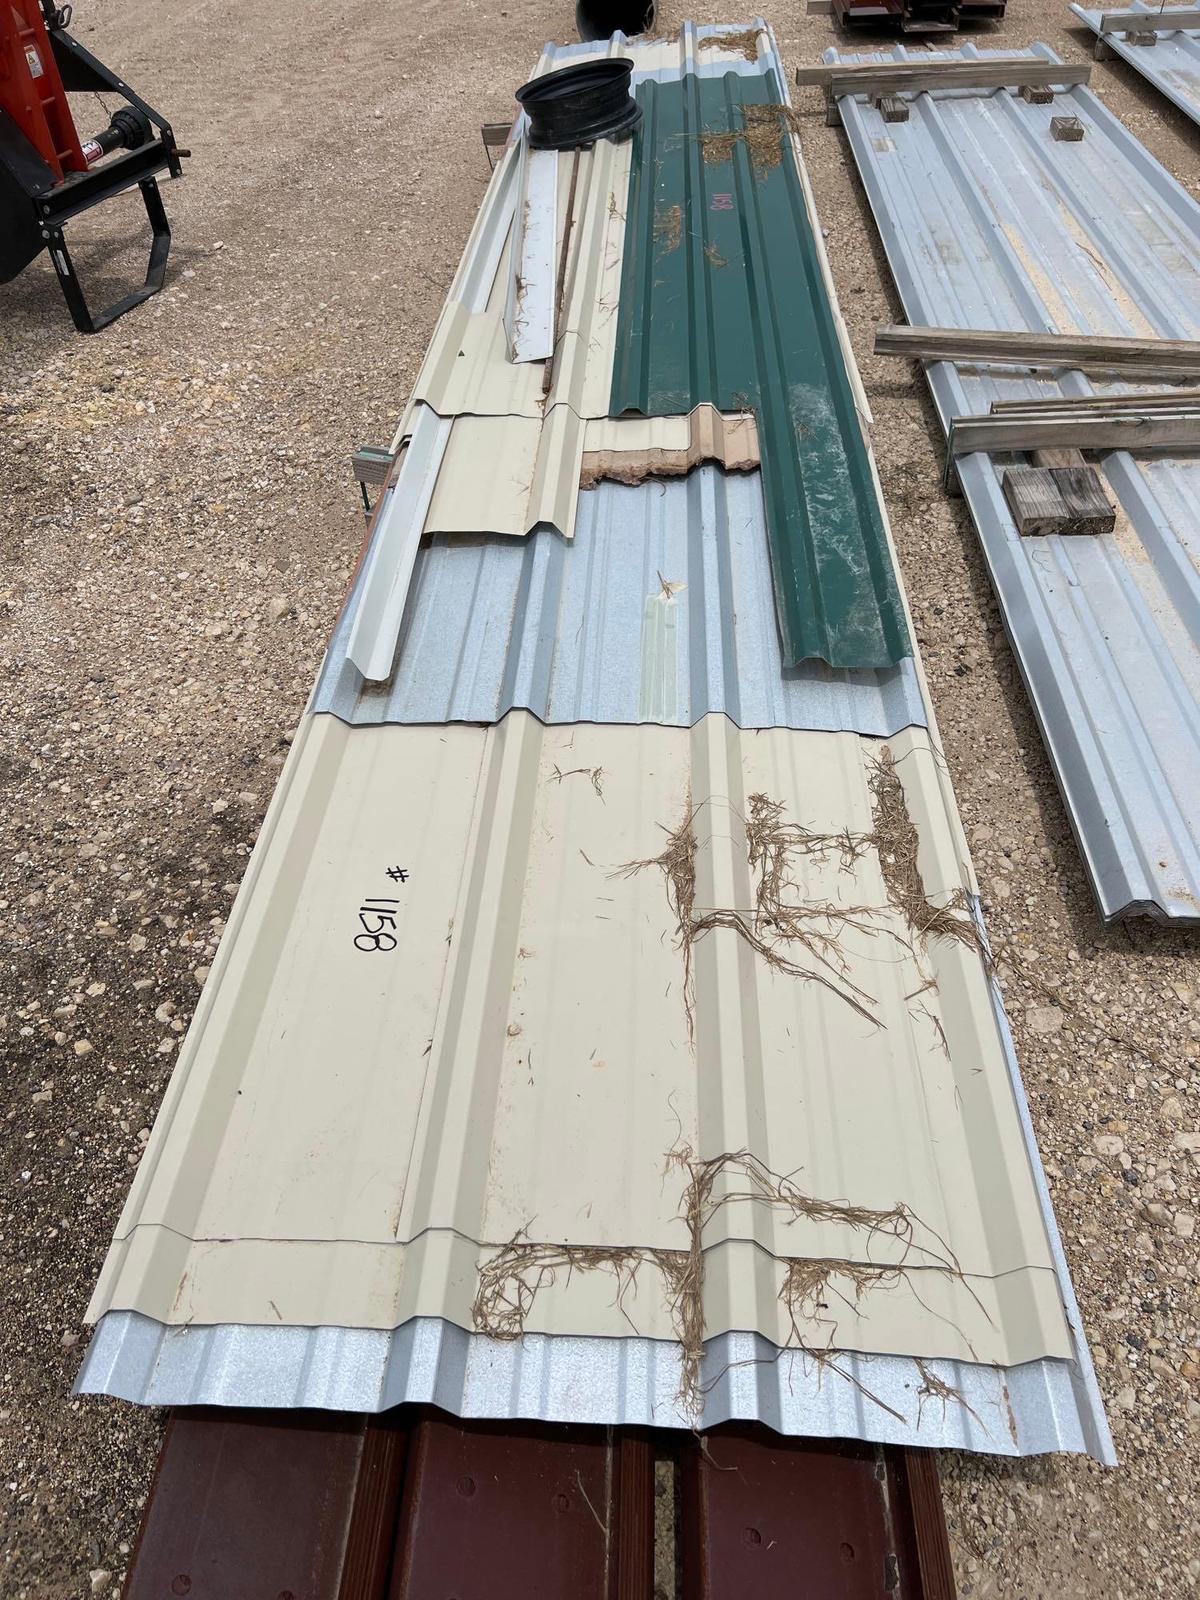 22 Z-Purlins - ONE MONEY 14 - 23' X 7 1/2" 8 - 24' X 3 1/2" Comes with Assorted Cover Sheets and